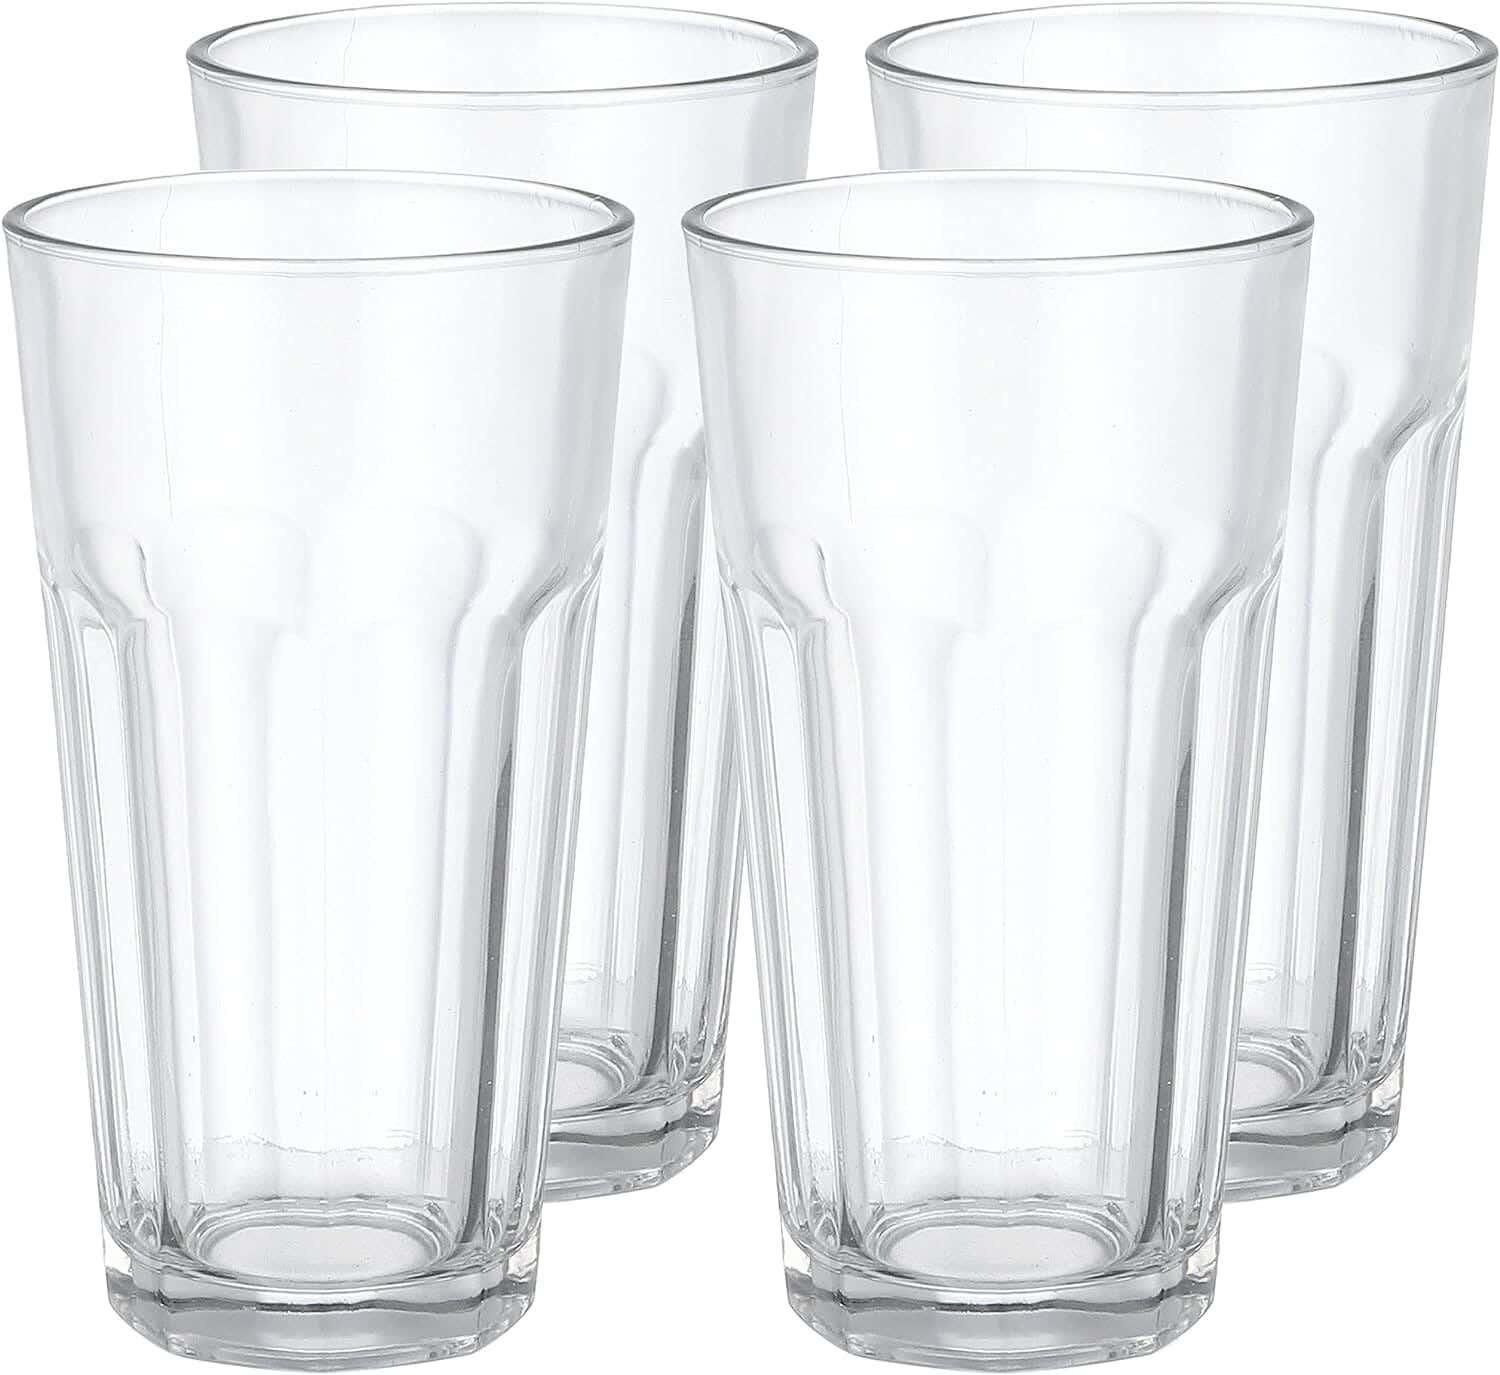 Get Genie Glass Cups Set, 6 Pieces - Clear with best offers | Raneen.com